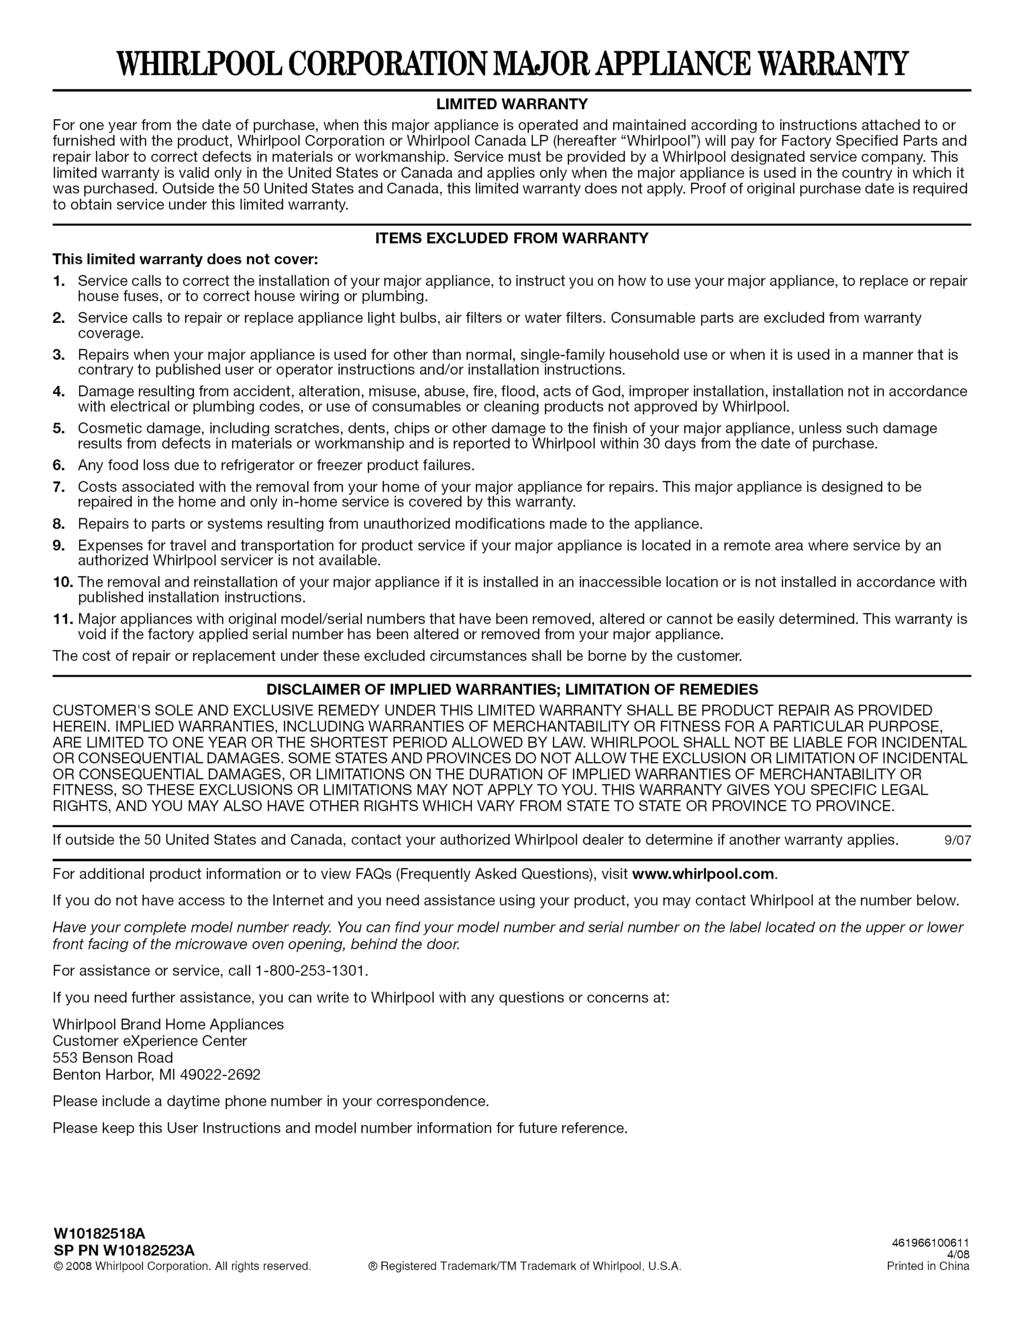 WHIRLPOOLCORPORATIONMAJORAPPLIANCEWARRANTY LIMITED WARRANTY For one year from the date of purchase, when this major appliance is operated and maintained according to instructions attached to or